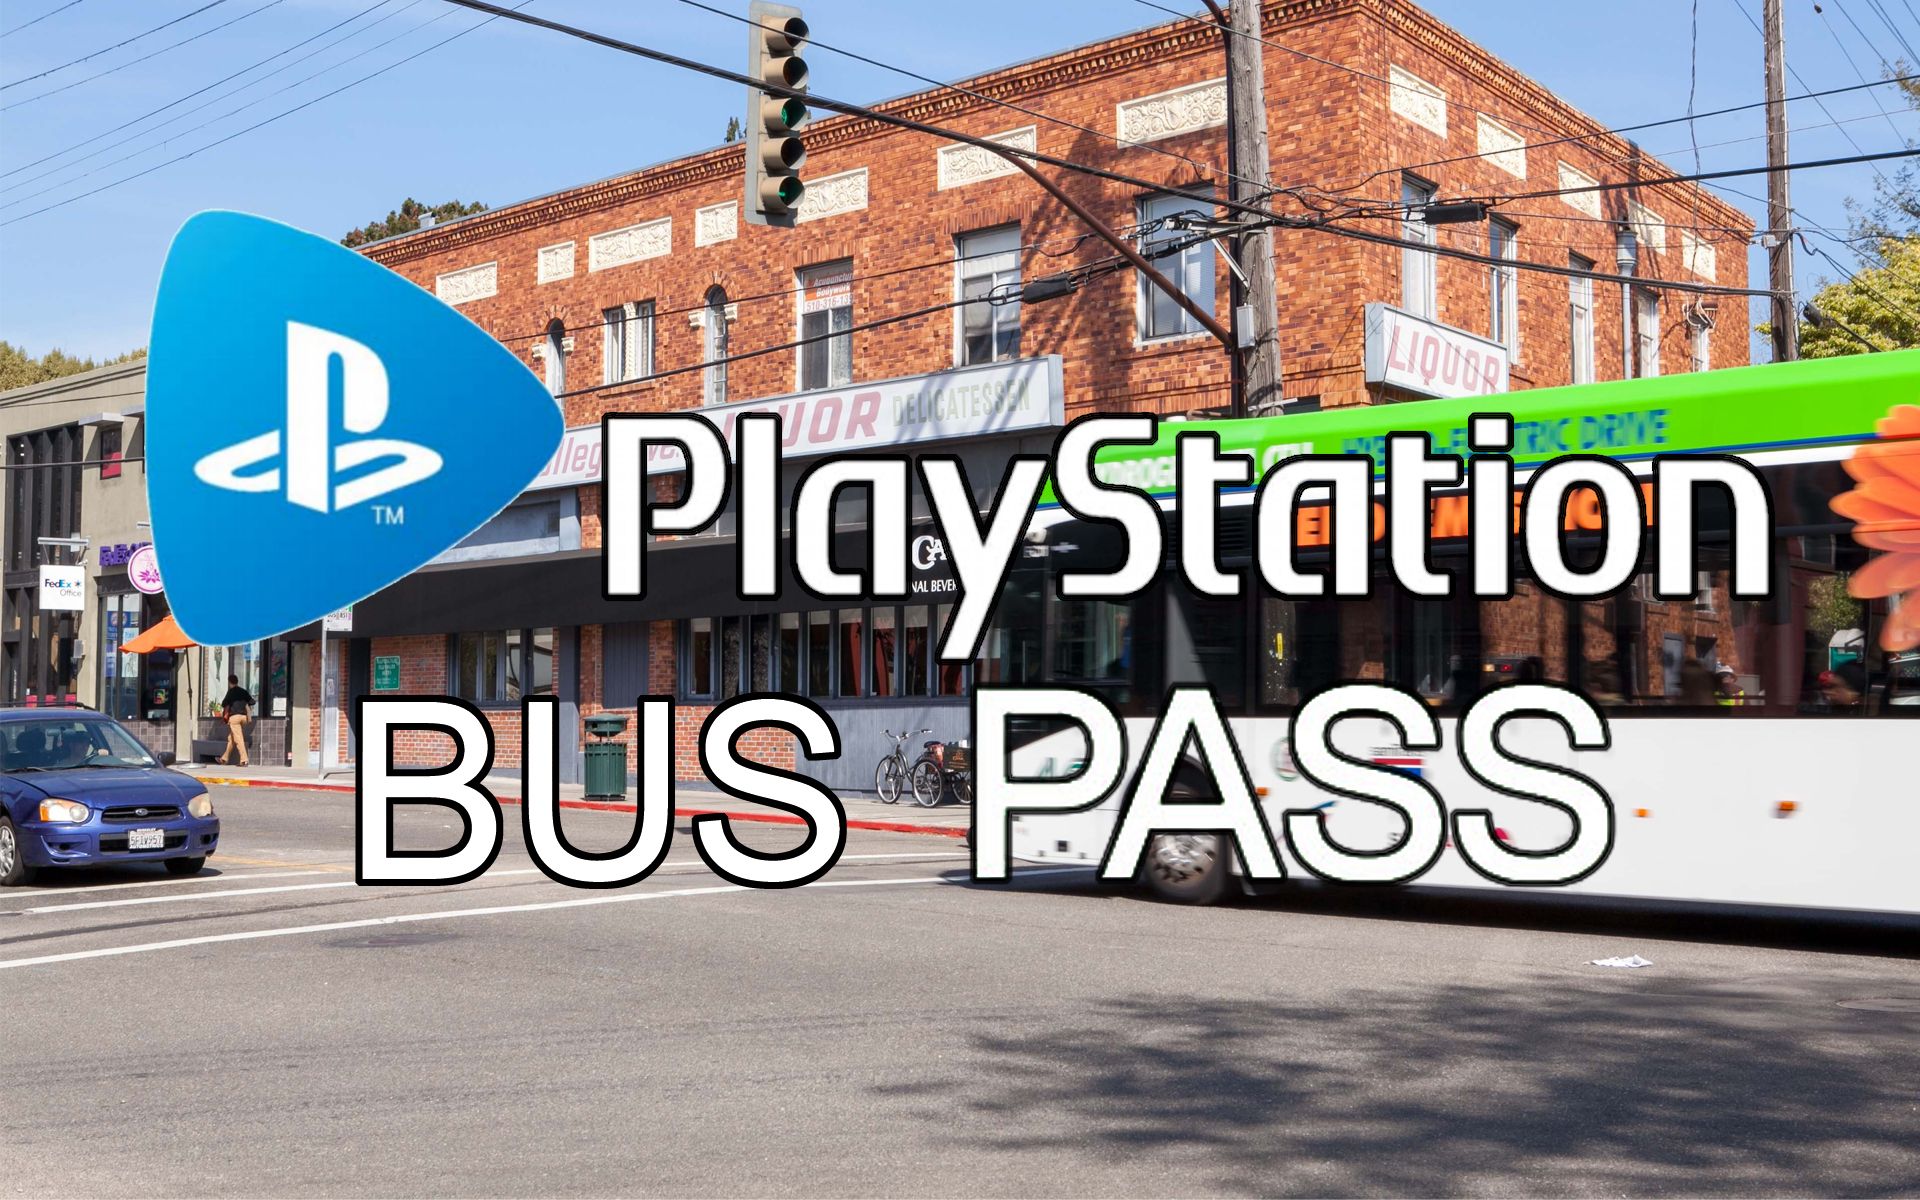 Sony Announces PlayStation Bus Pass